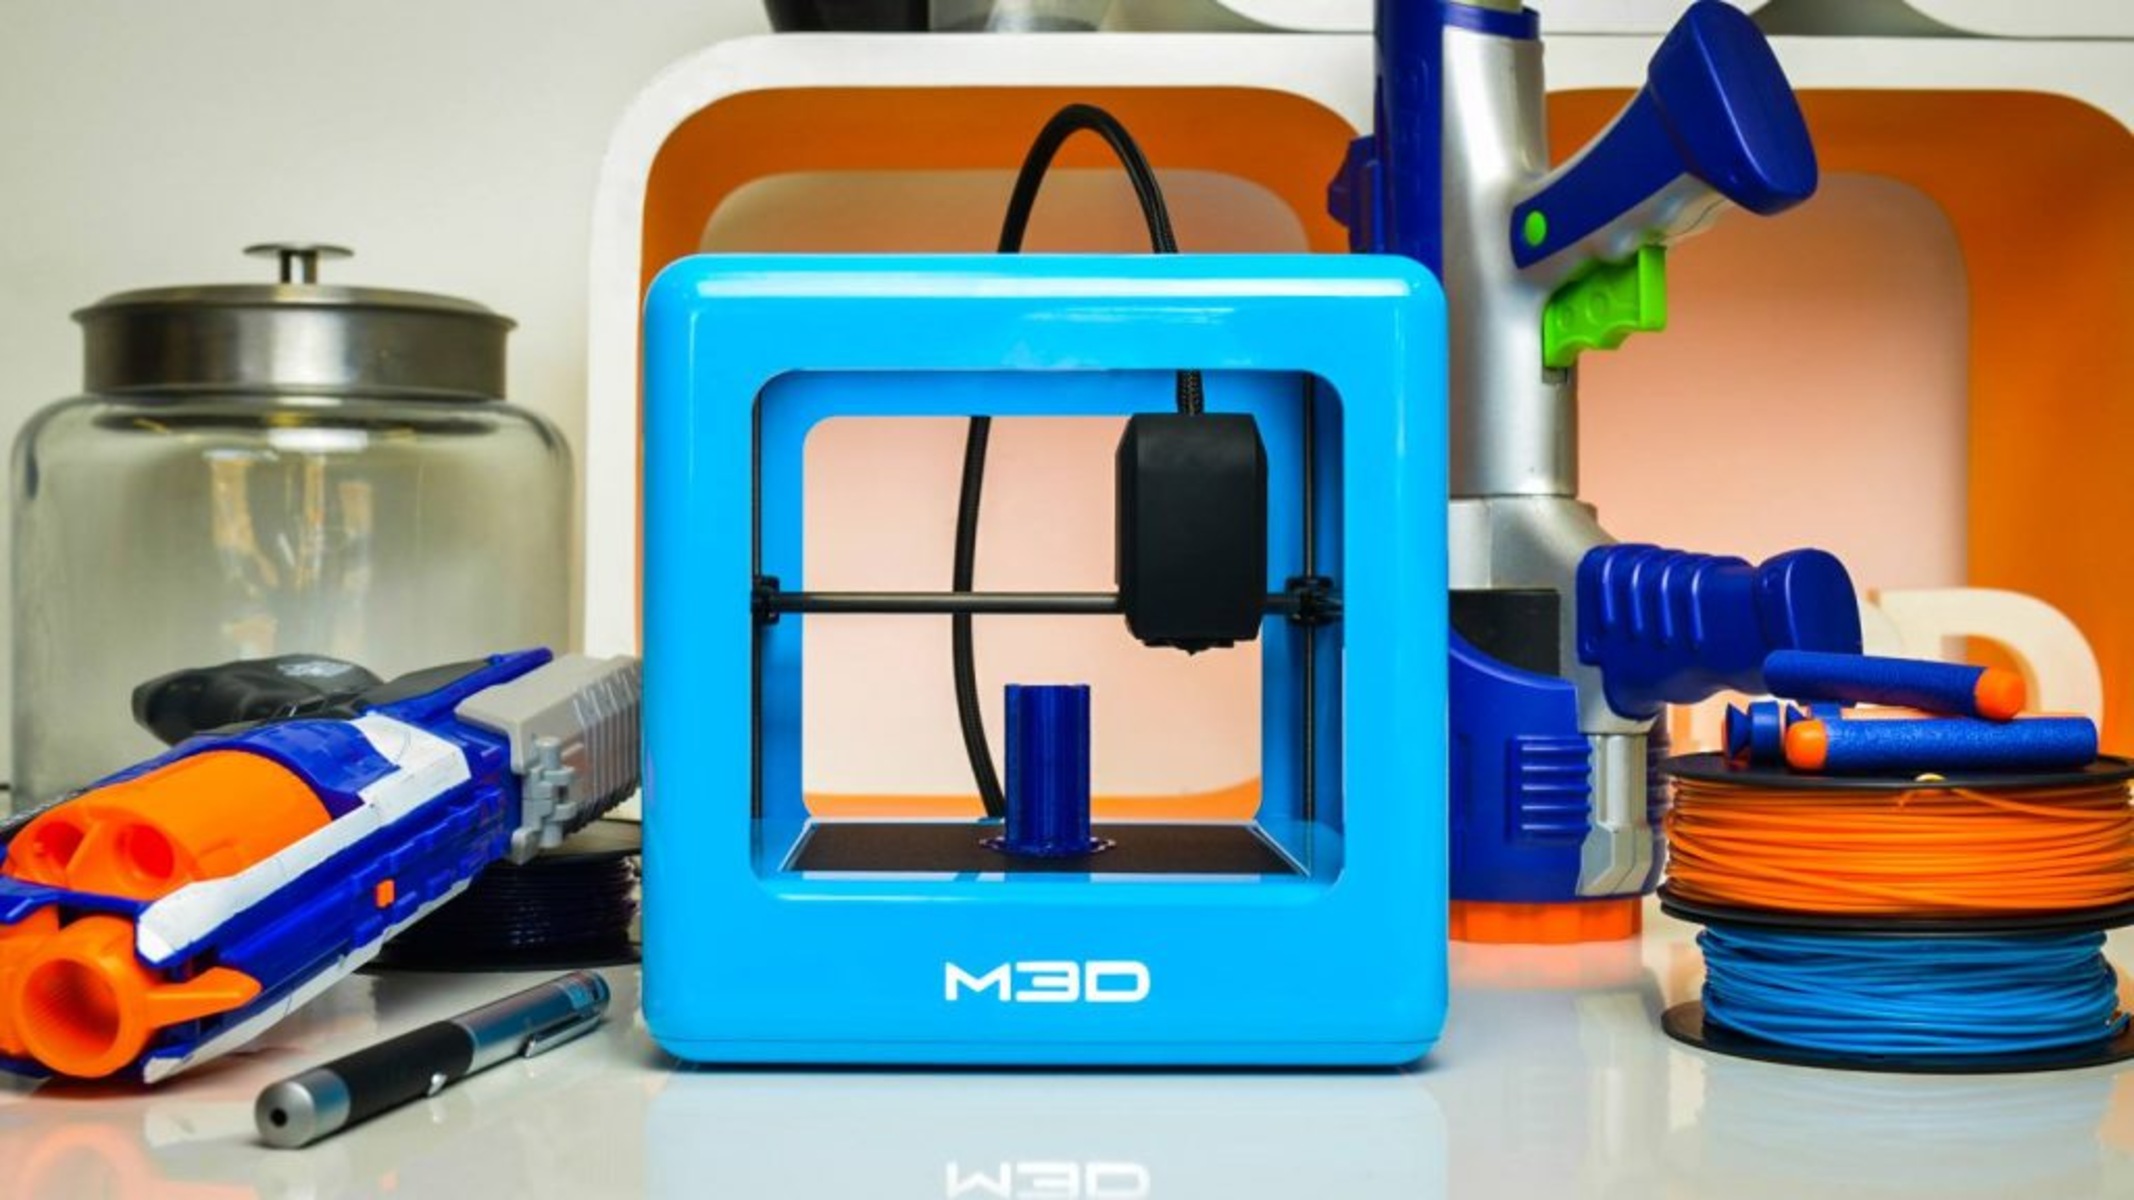 What Can 3D Printing Be Used For